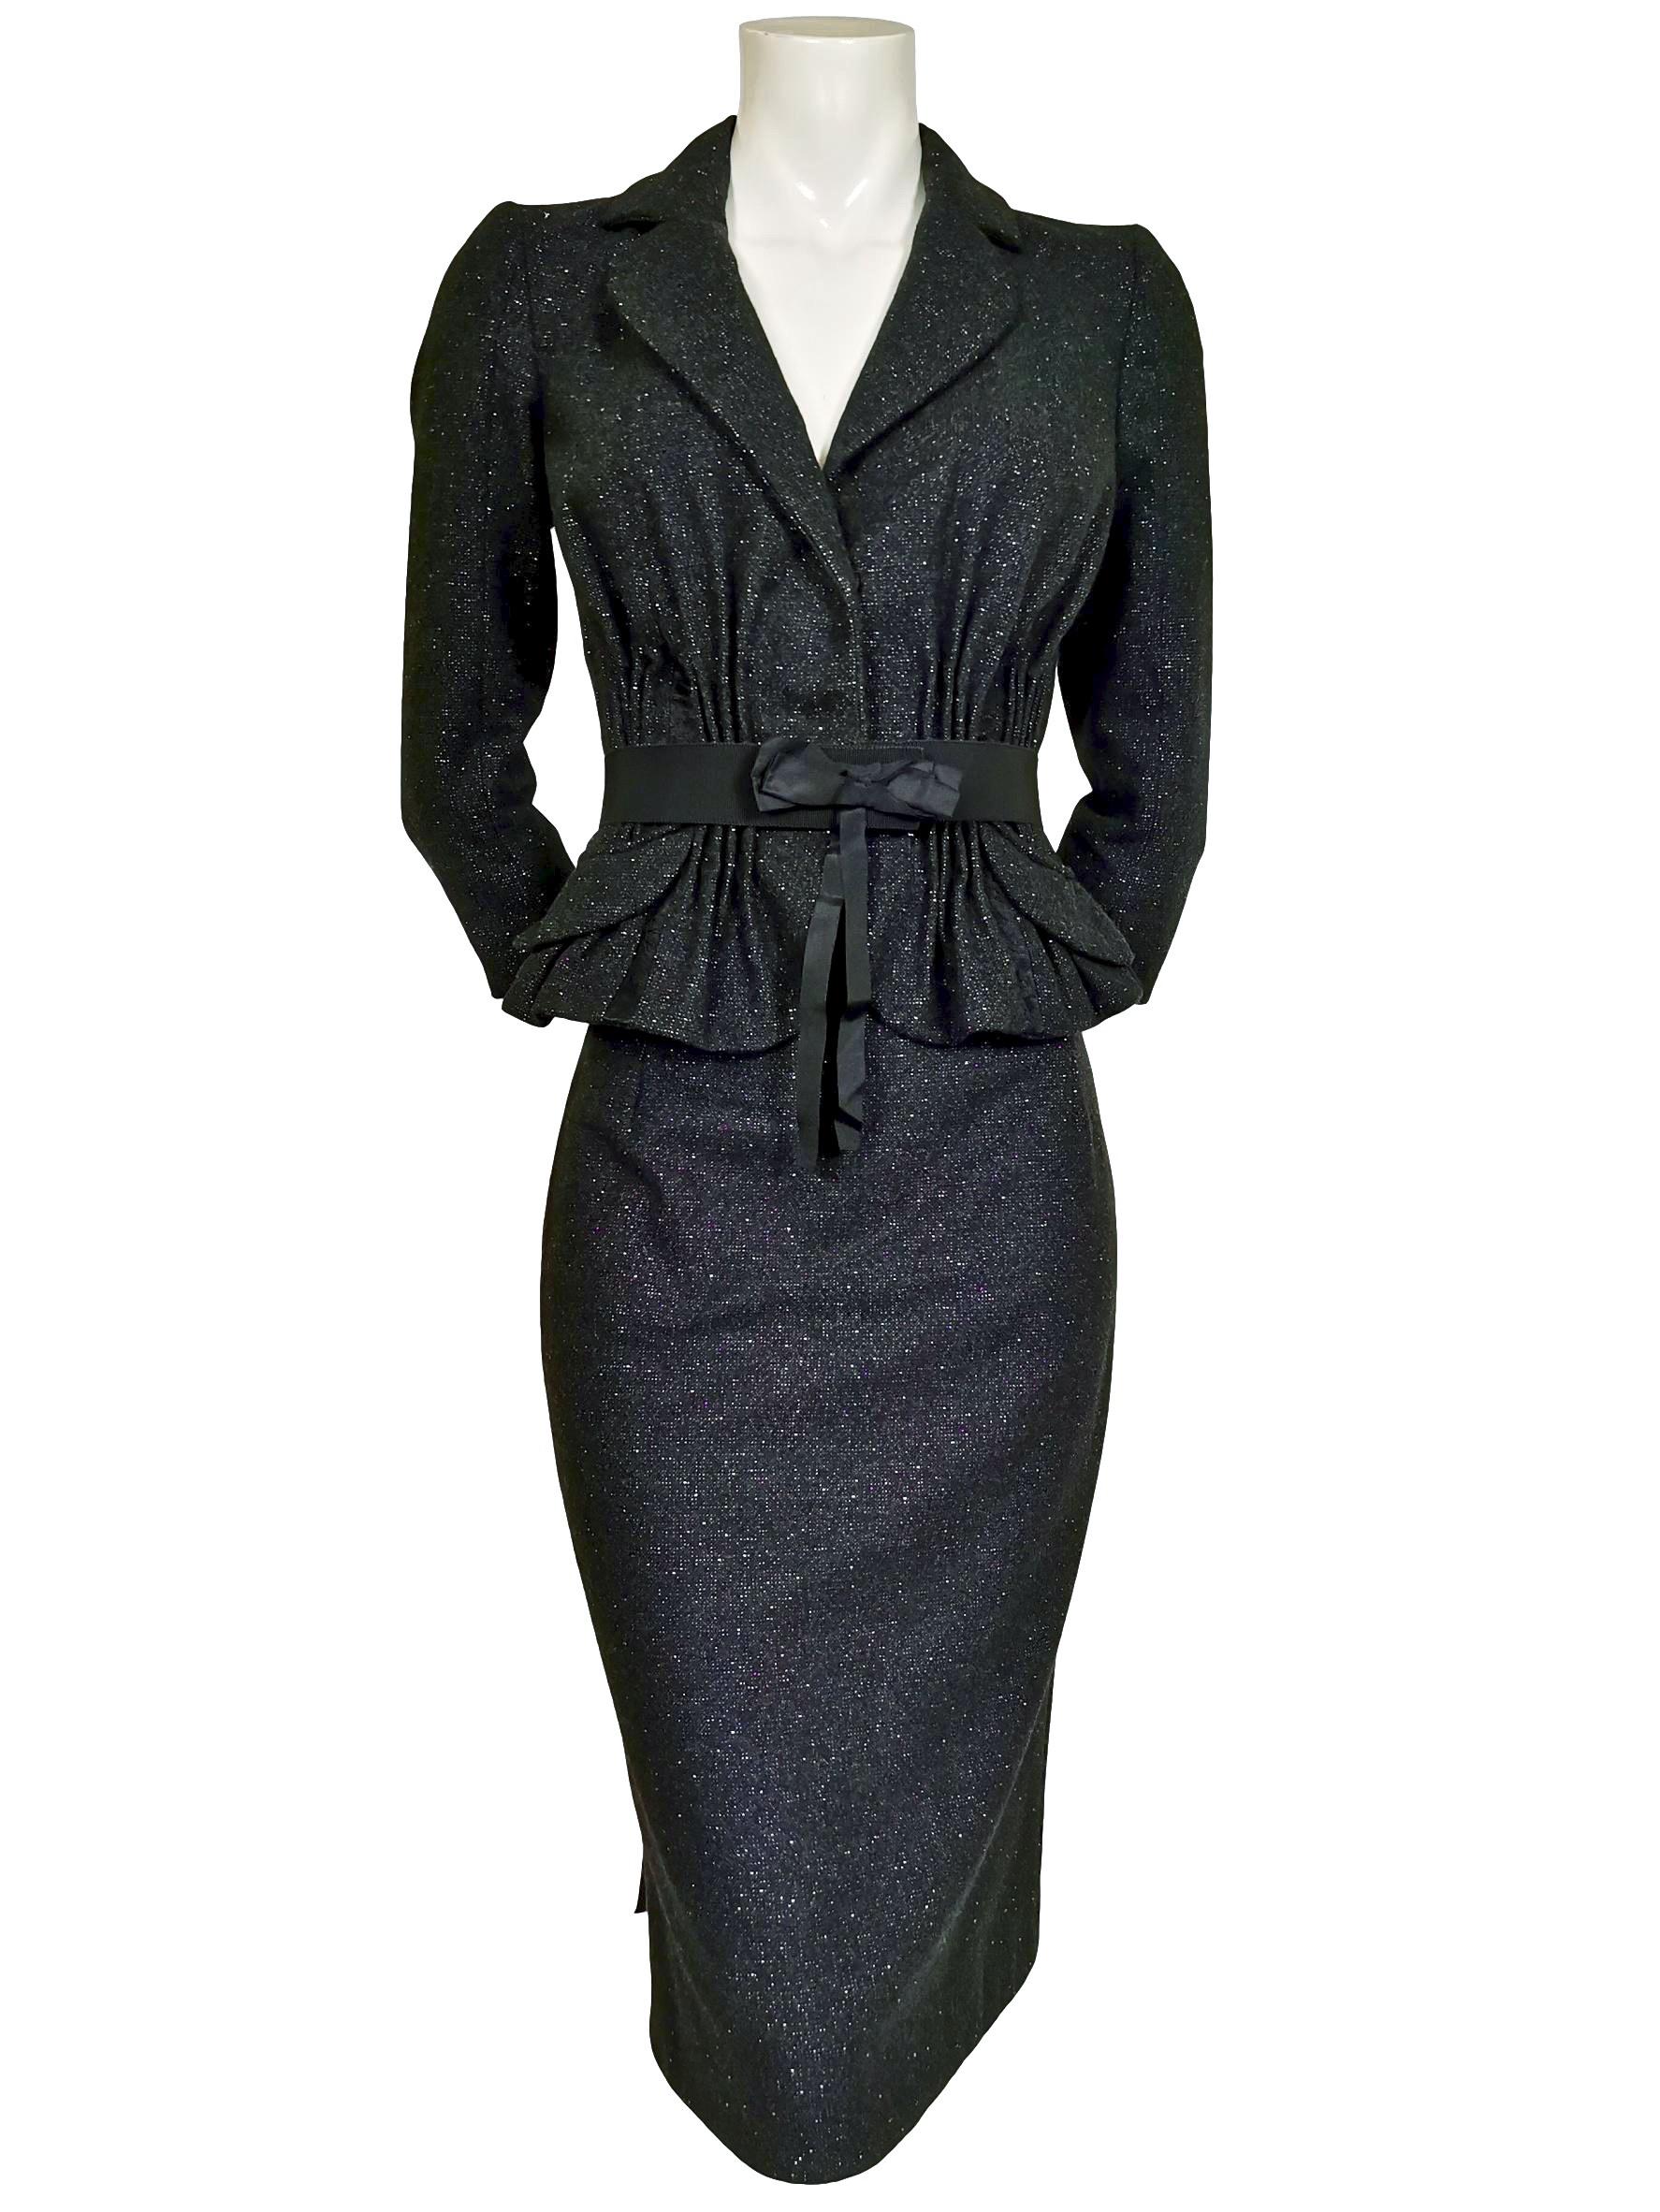 John Galliano Wool/Cashmere, Lace and Ribbon Skirt Suit A/W 2011 For Sale 10